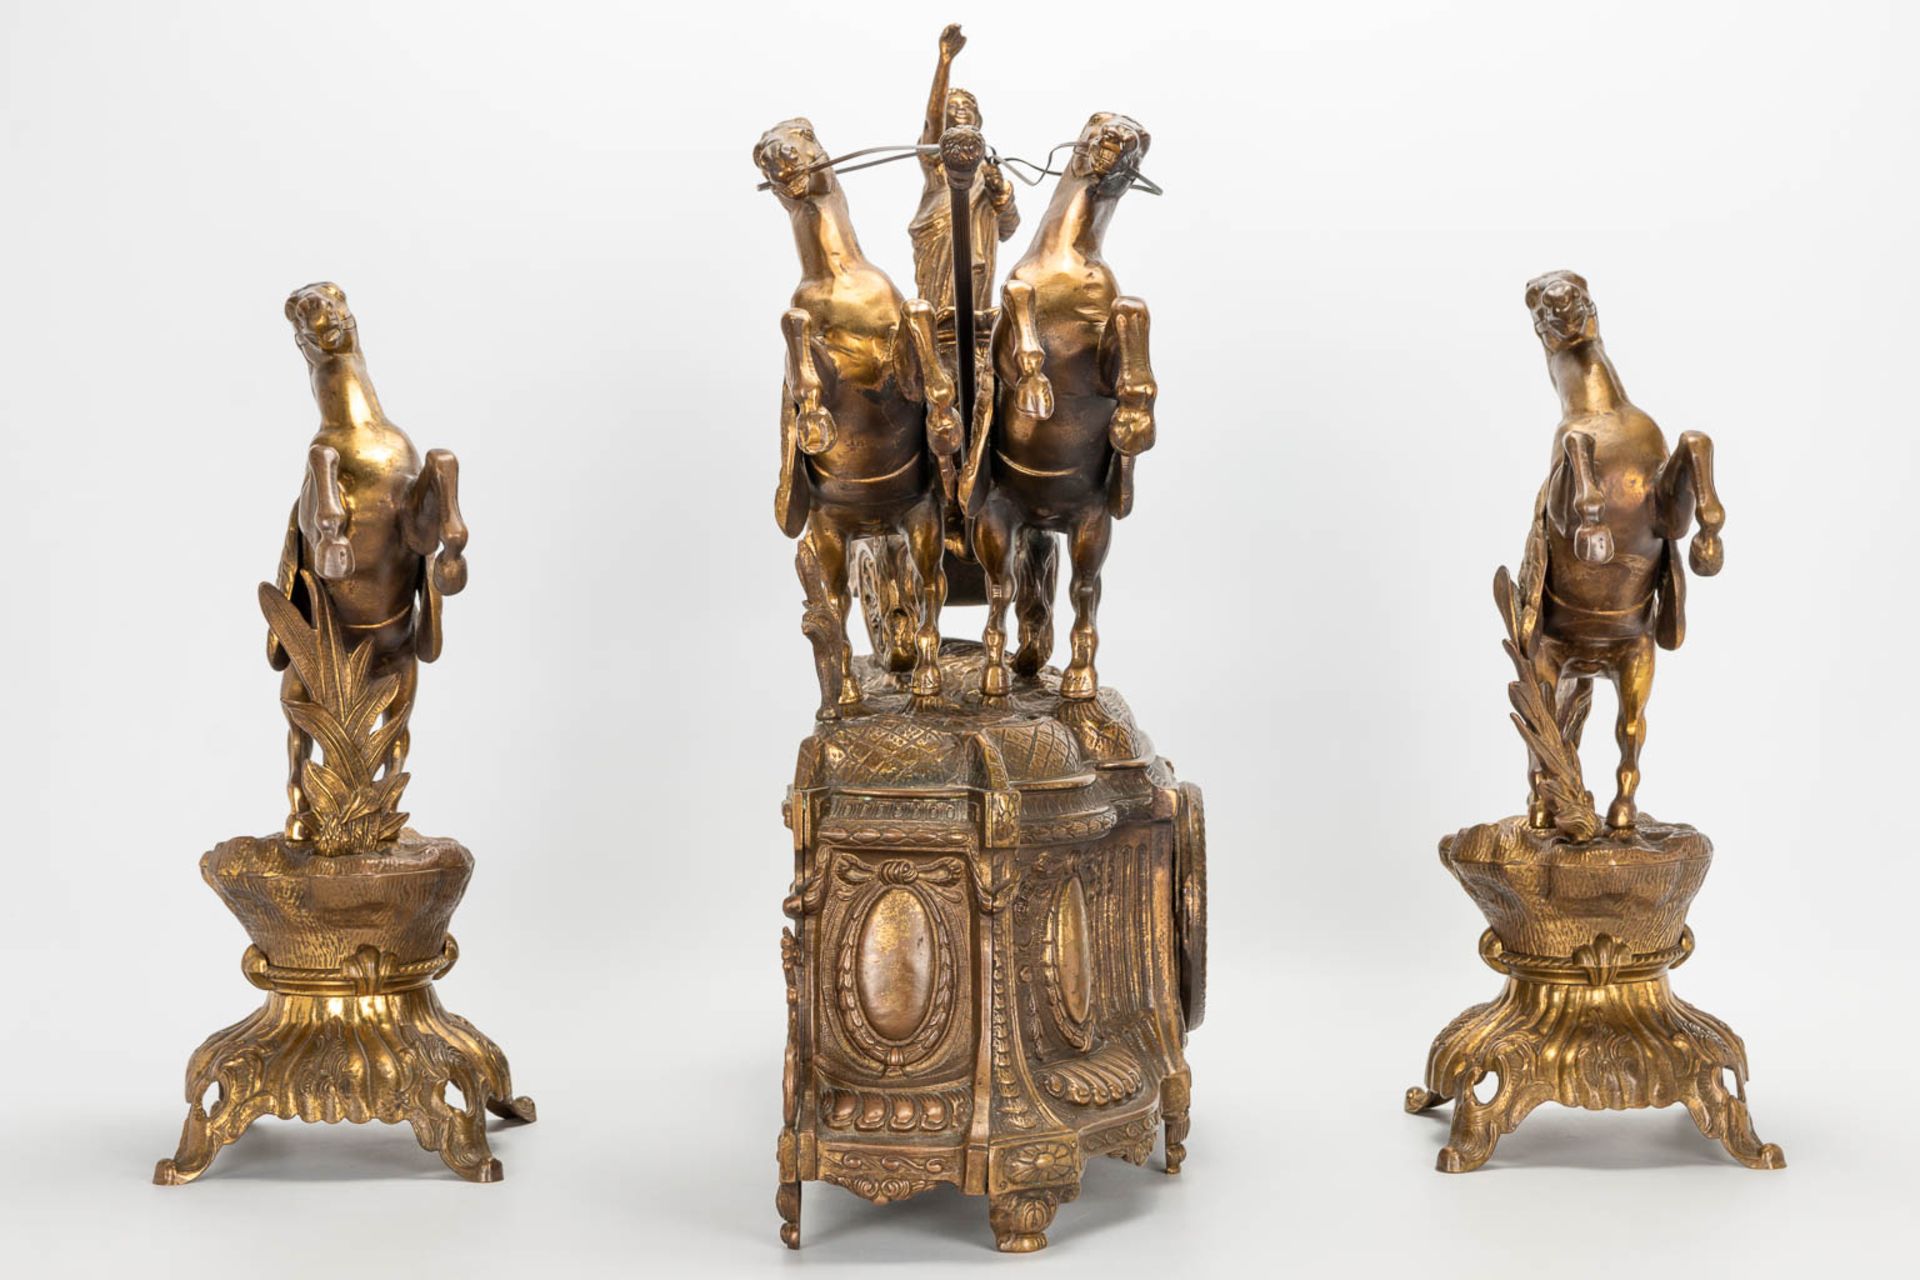 A 3 piece garniture clockset made of bronze, consisting of a clock with battle cart and 2 side piece - Image 5 of 18